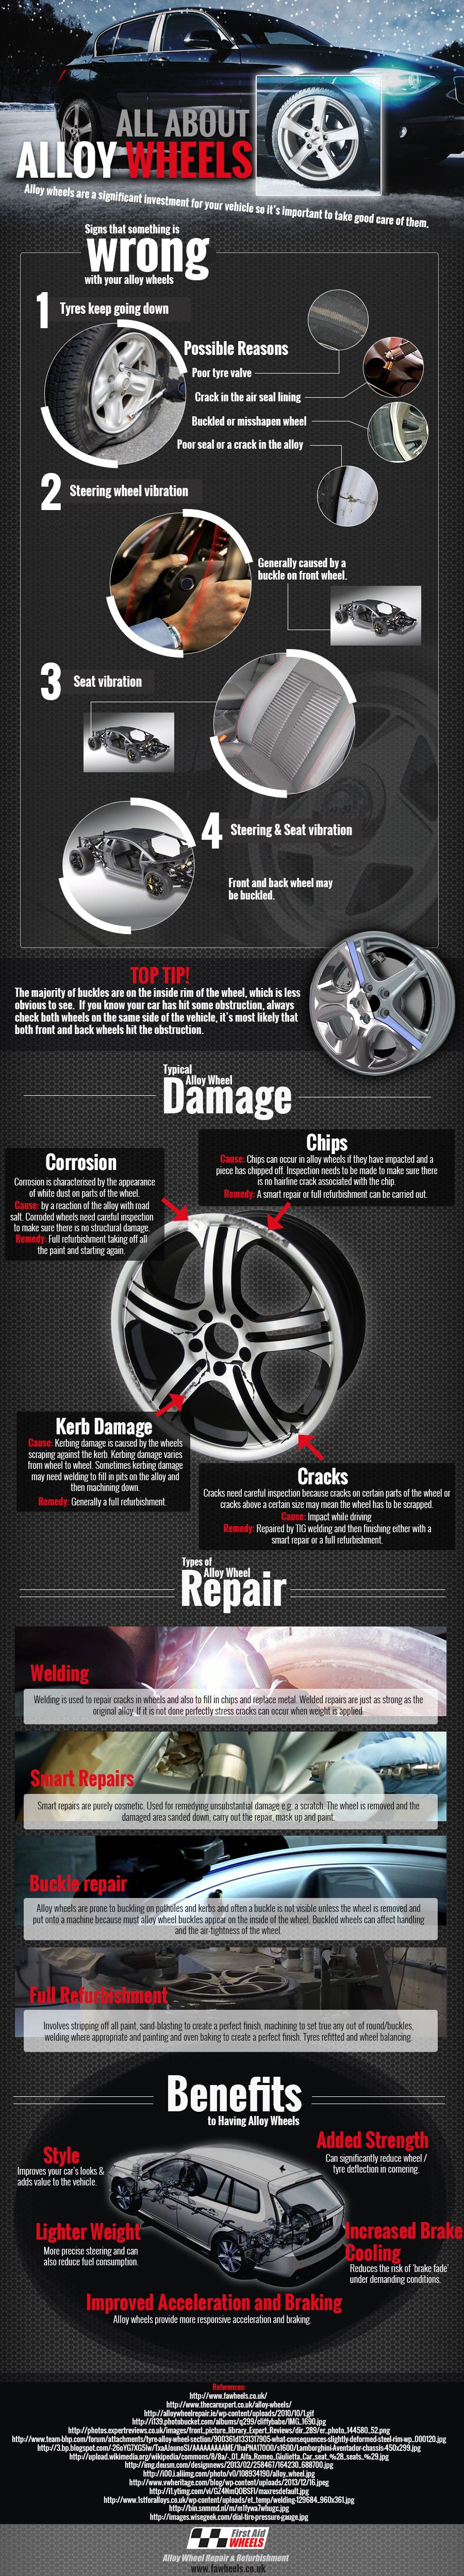 Caring for your alloys wheels and why it's important (The Car Expert)